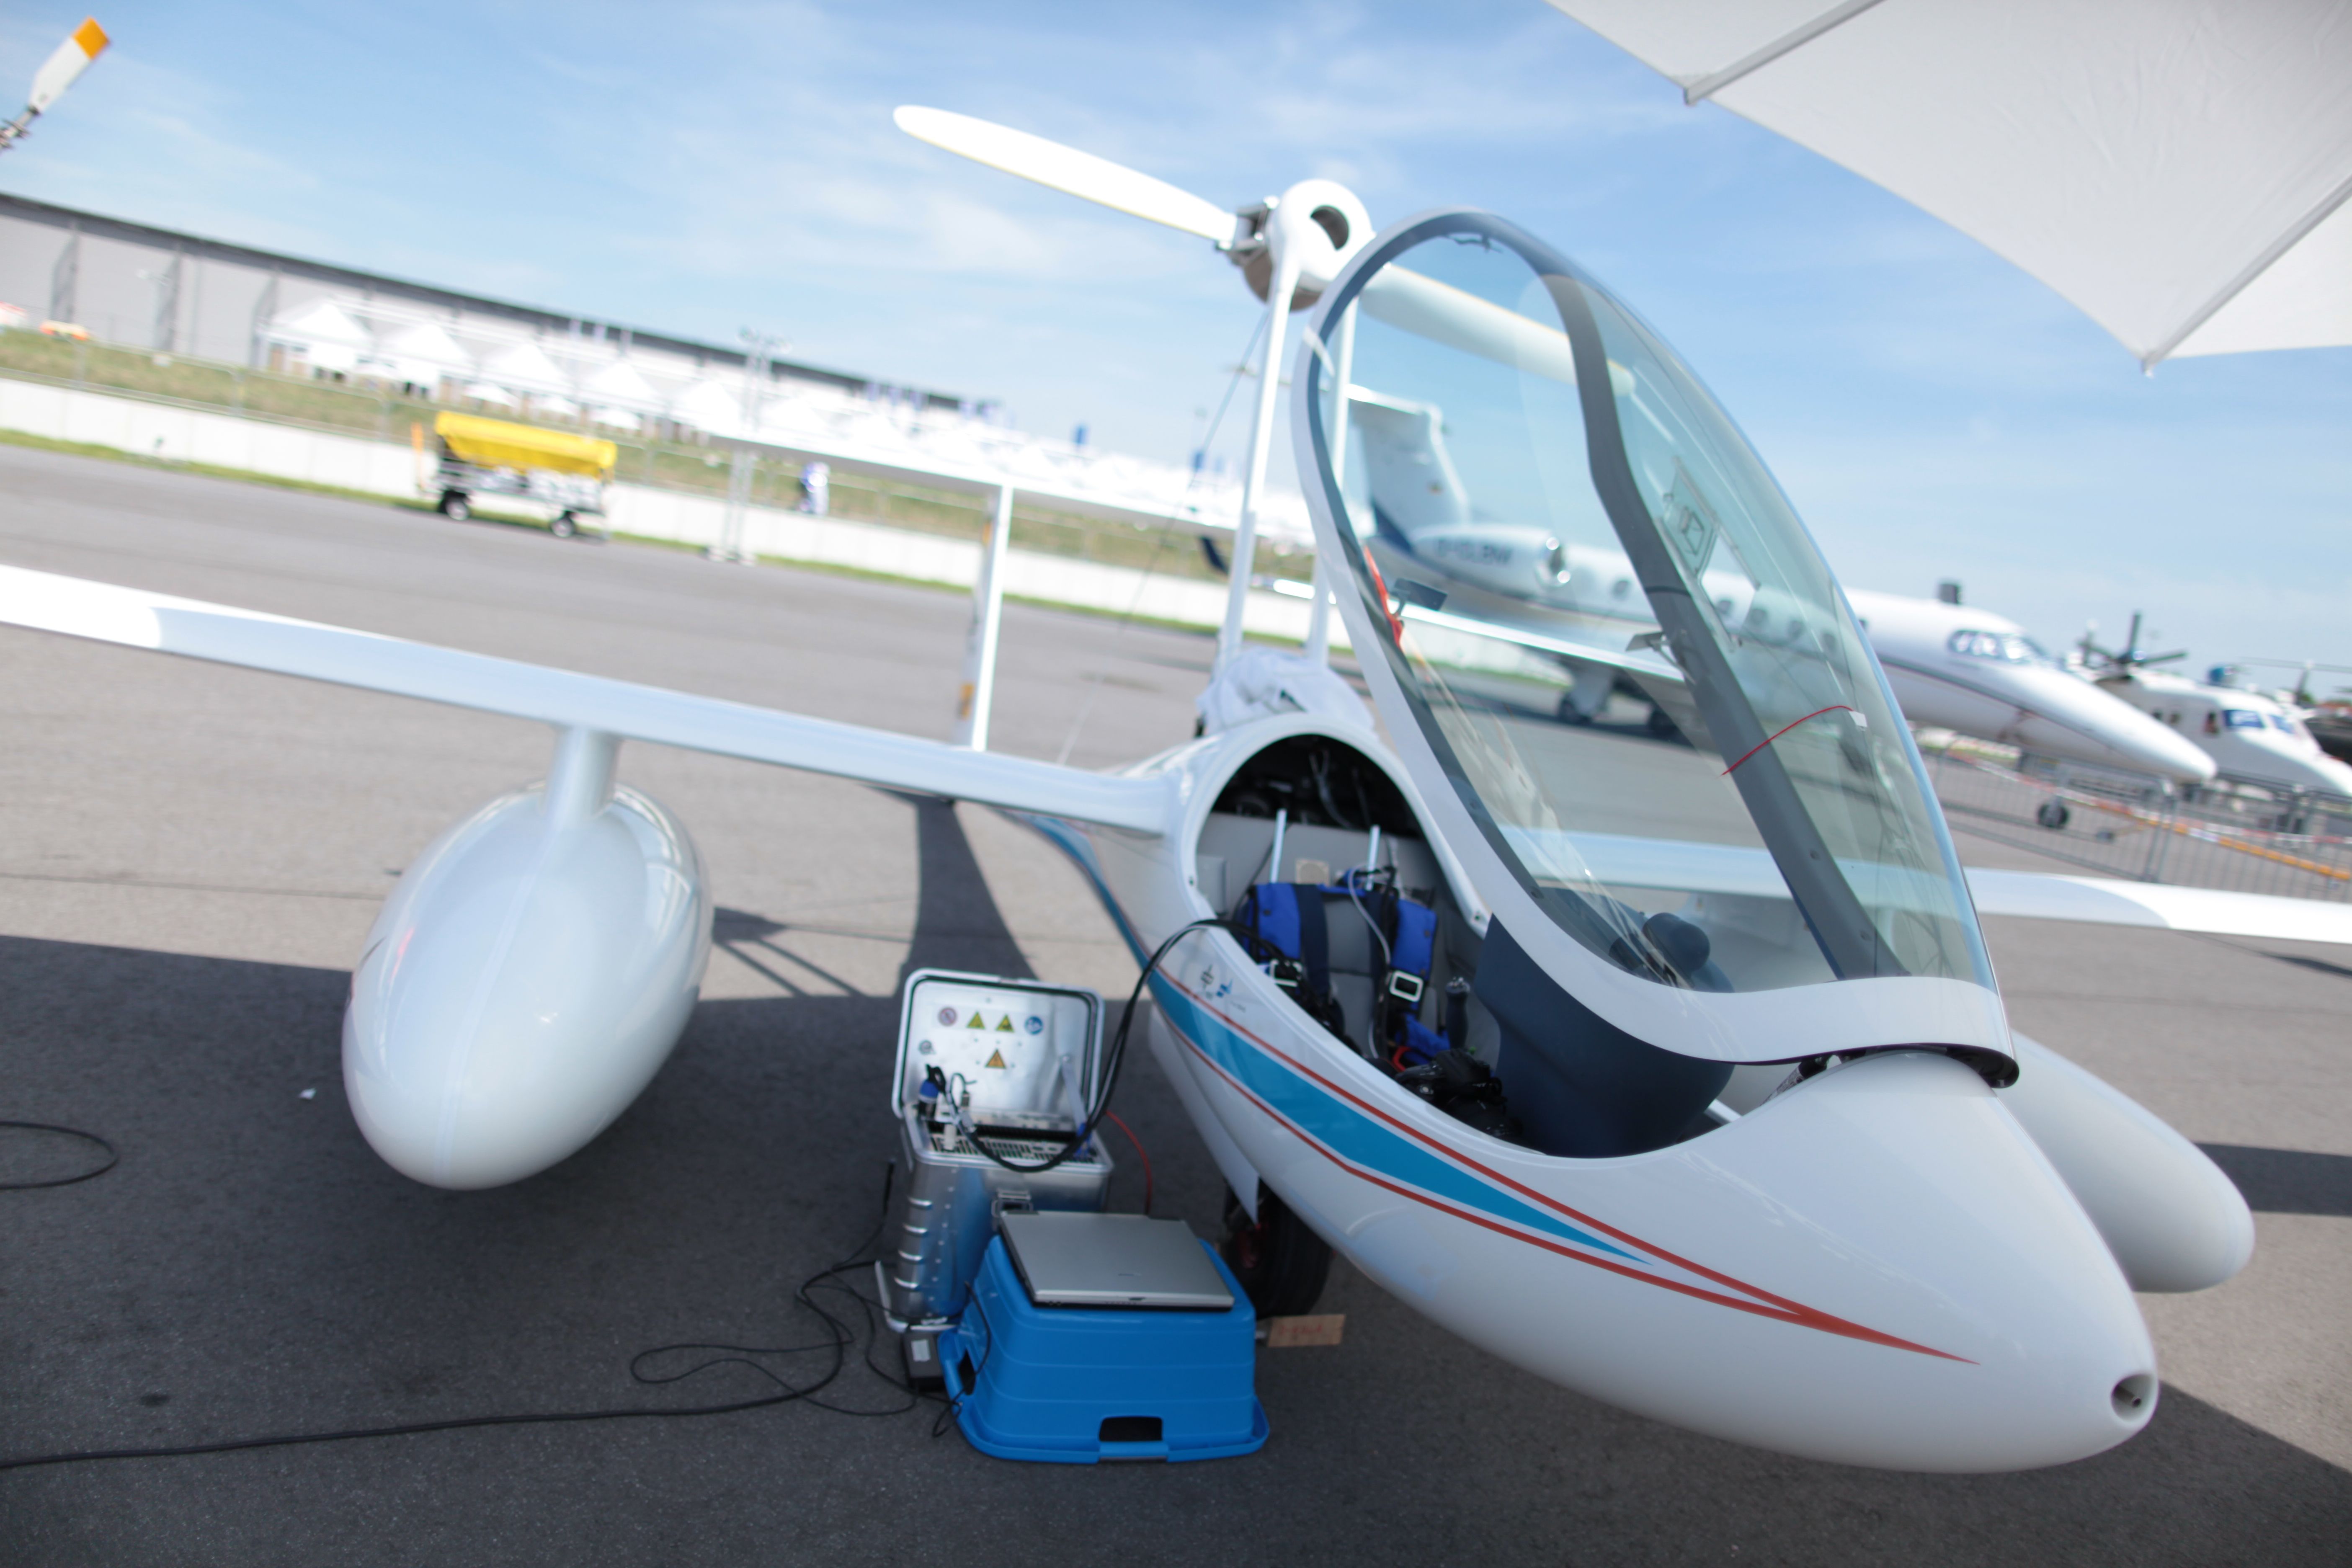 Antares DLR-H2 research aircraft powered by hydrogen fuel cell